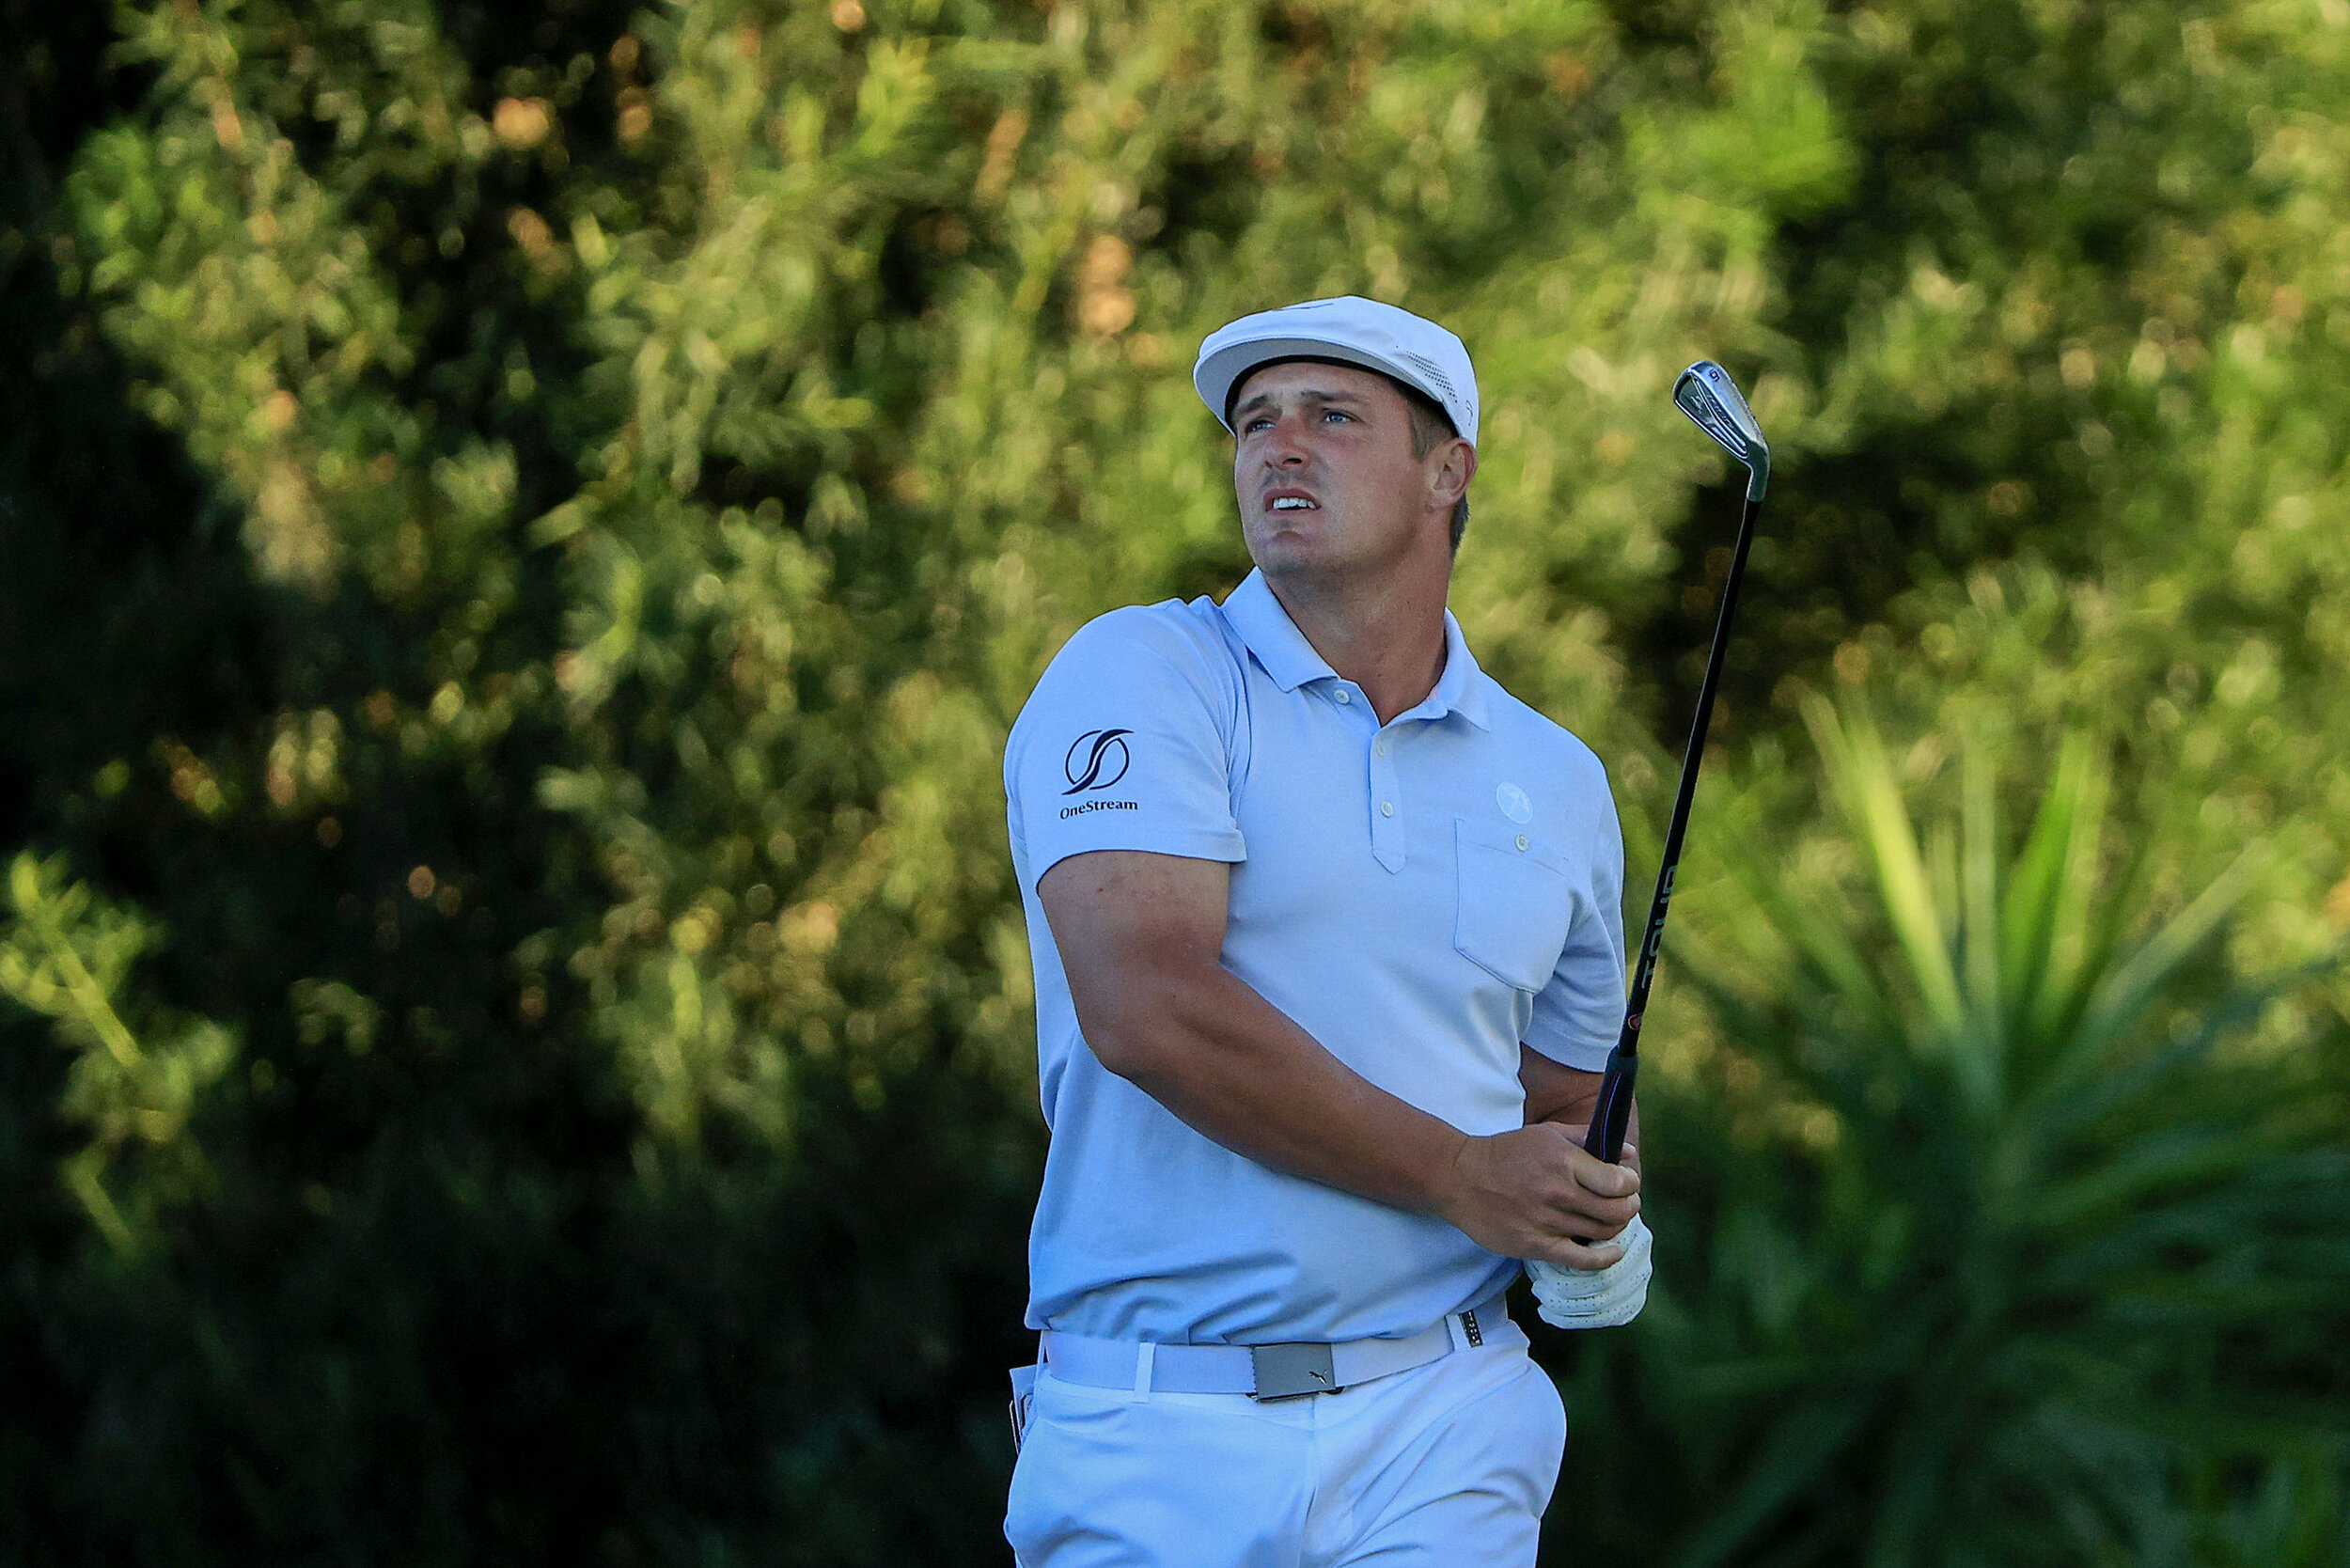  ORLANDO, FLORIDA - MARCH 07: Bryson DeChambeau of the United States plays his shot from the 17th tee during the final round of the Arnold Palmer Invitational Presented by MasterCard at the Bay Hill Club and Lodge on March 07, 2021 in Orlando, Florid